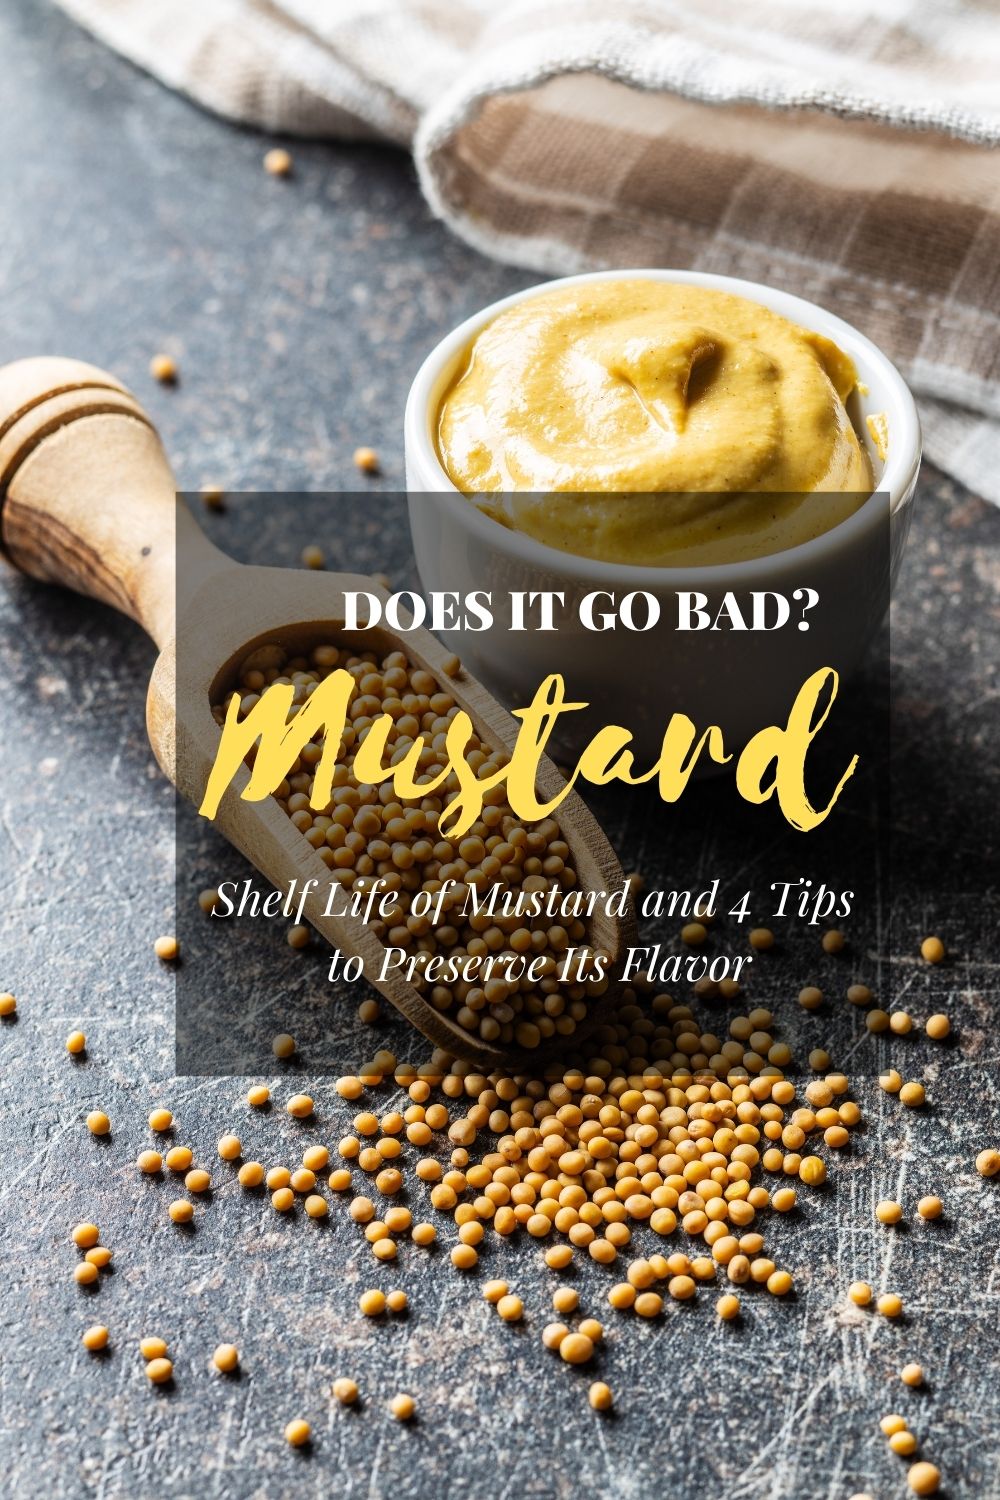 Does Mustard Go Bad? Shelf Life of Mustard and 4 Tips to Preserve Its Flavor